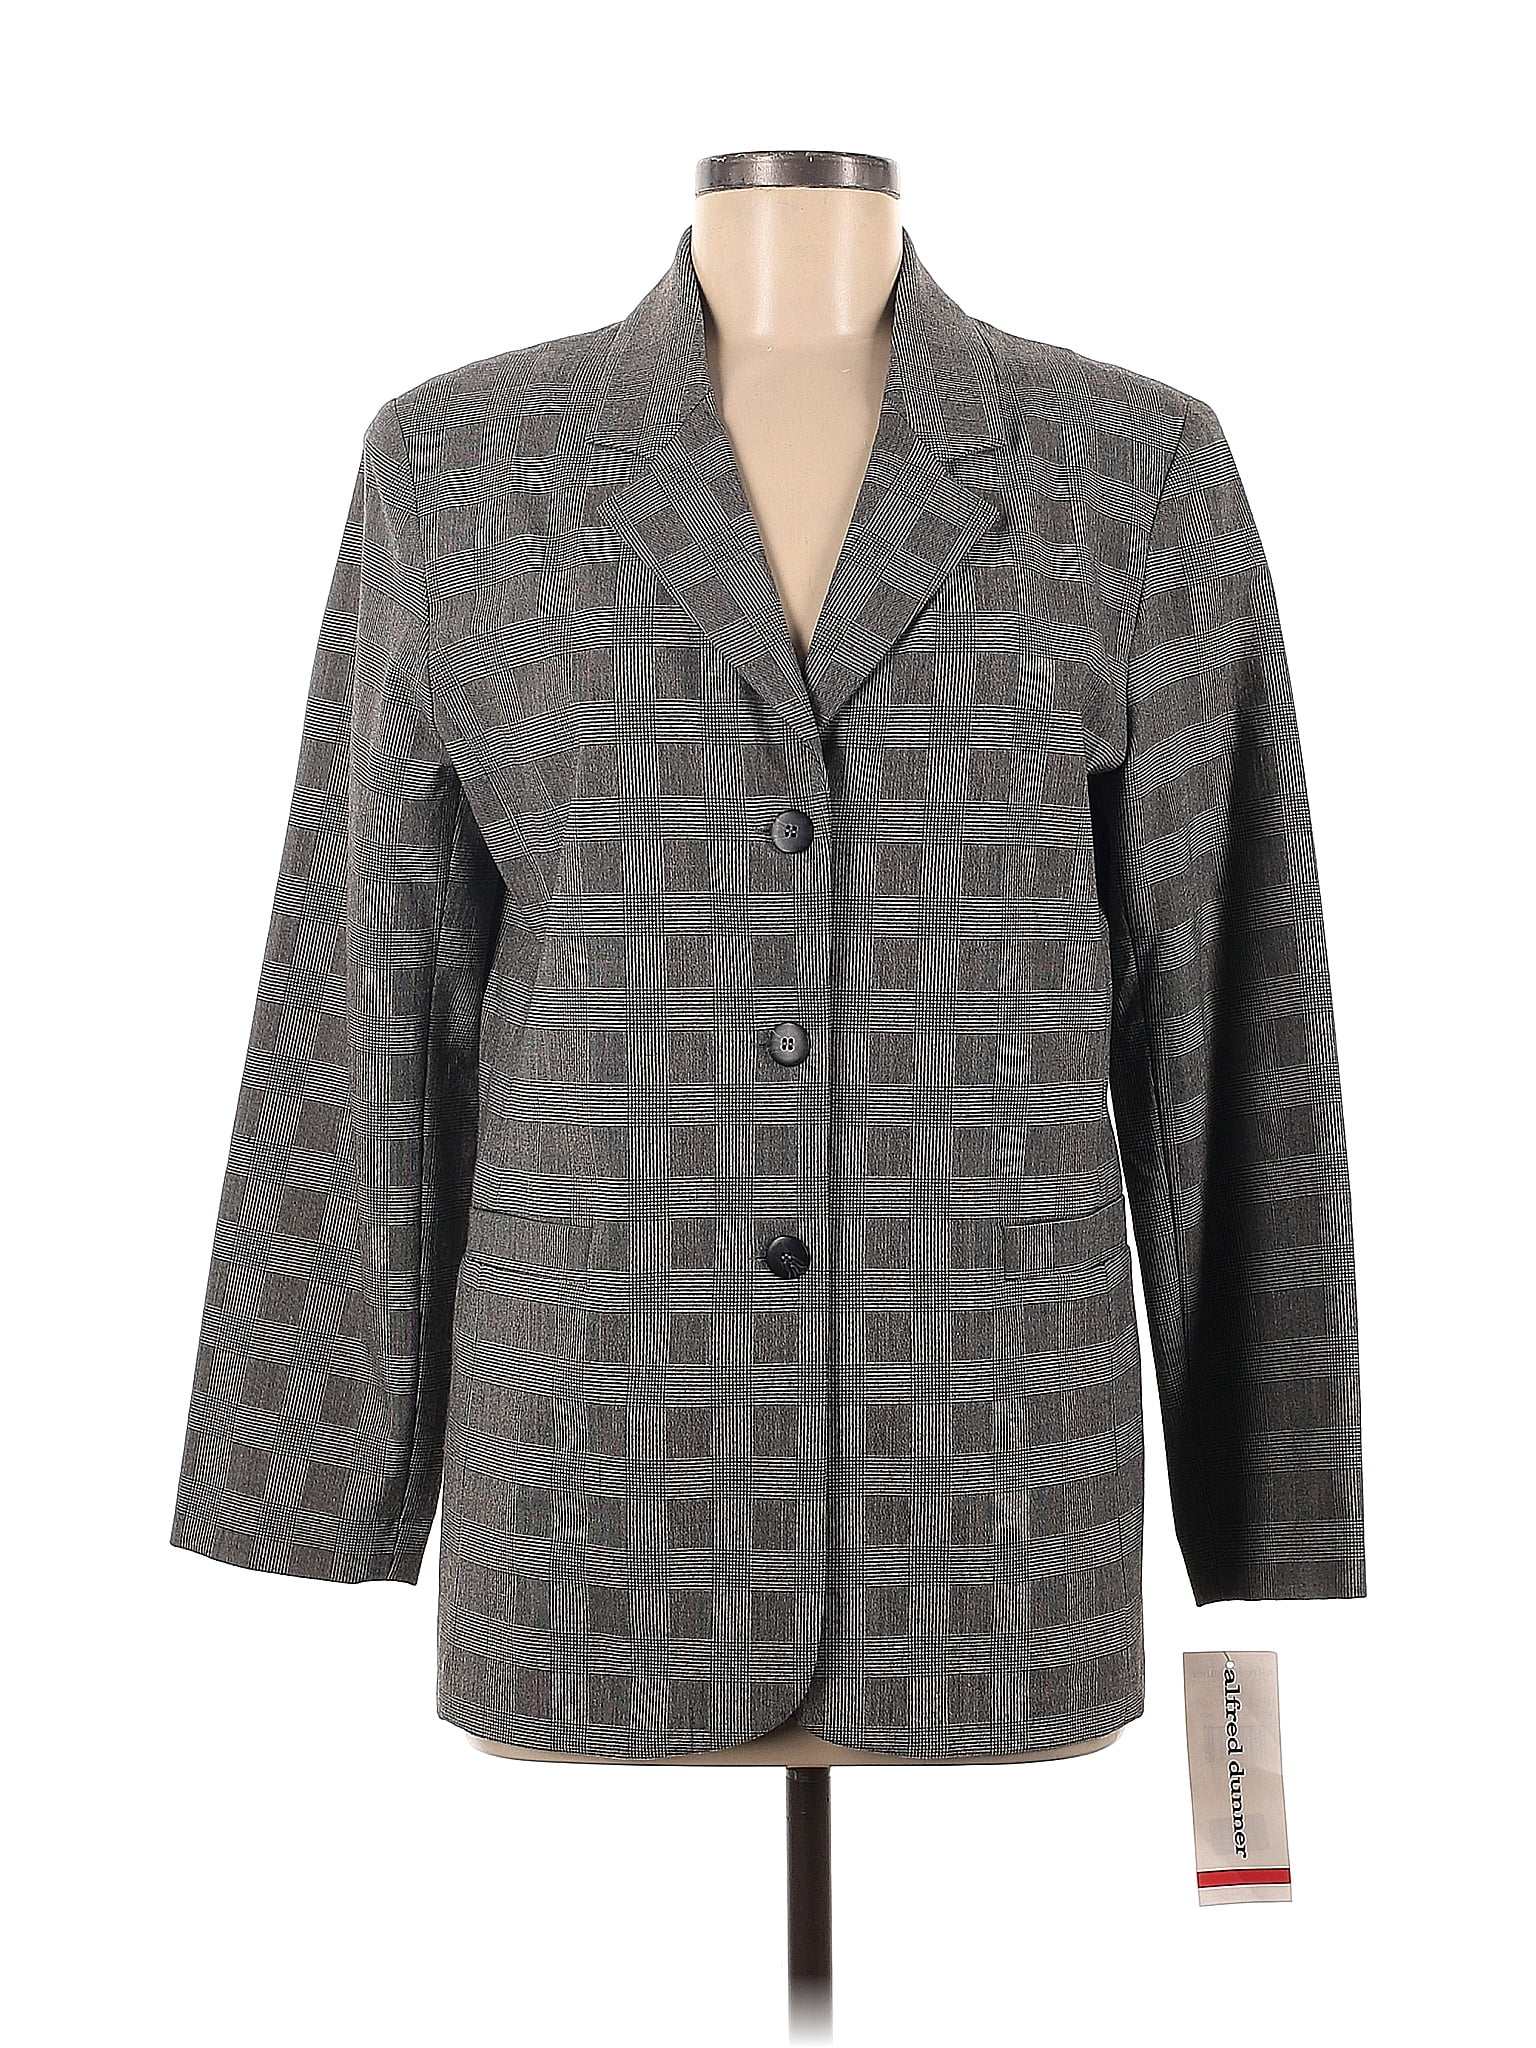 Alfred Dunner Houndstooth Jacquard Checkered-gingham Gray Blazer Size 8 ...